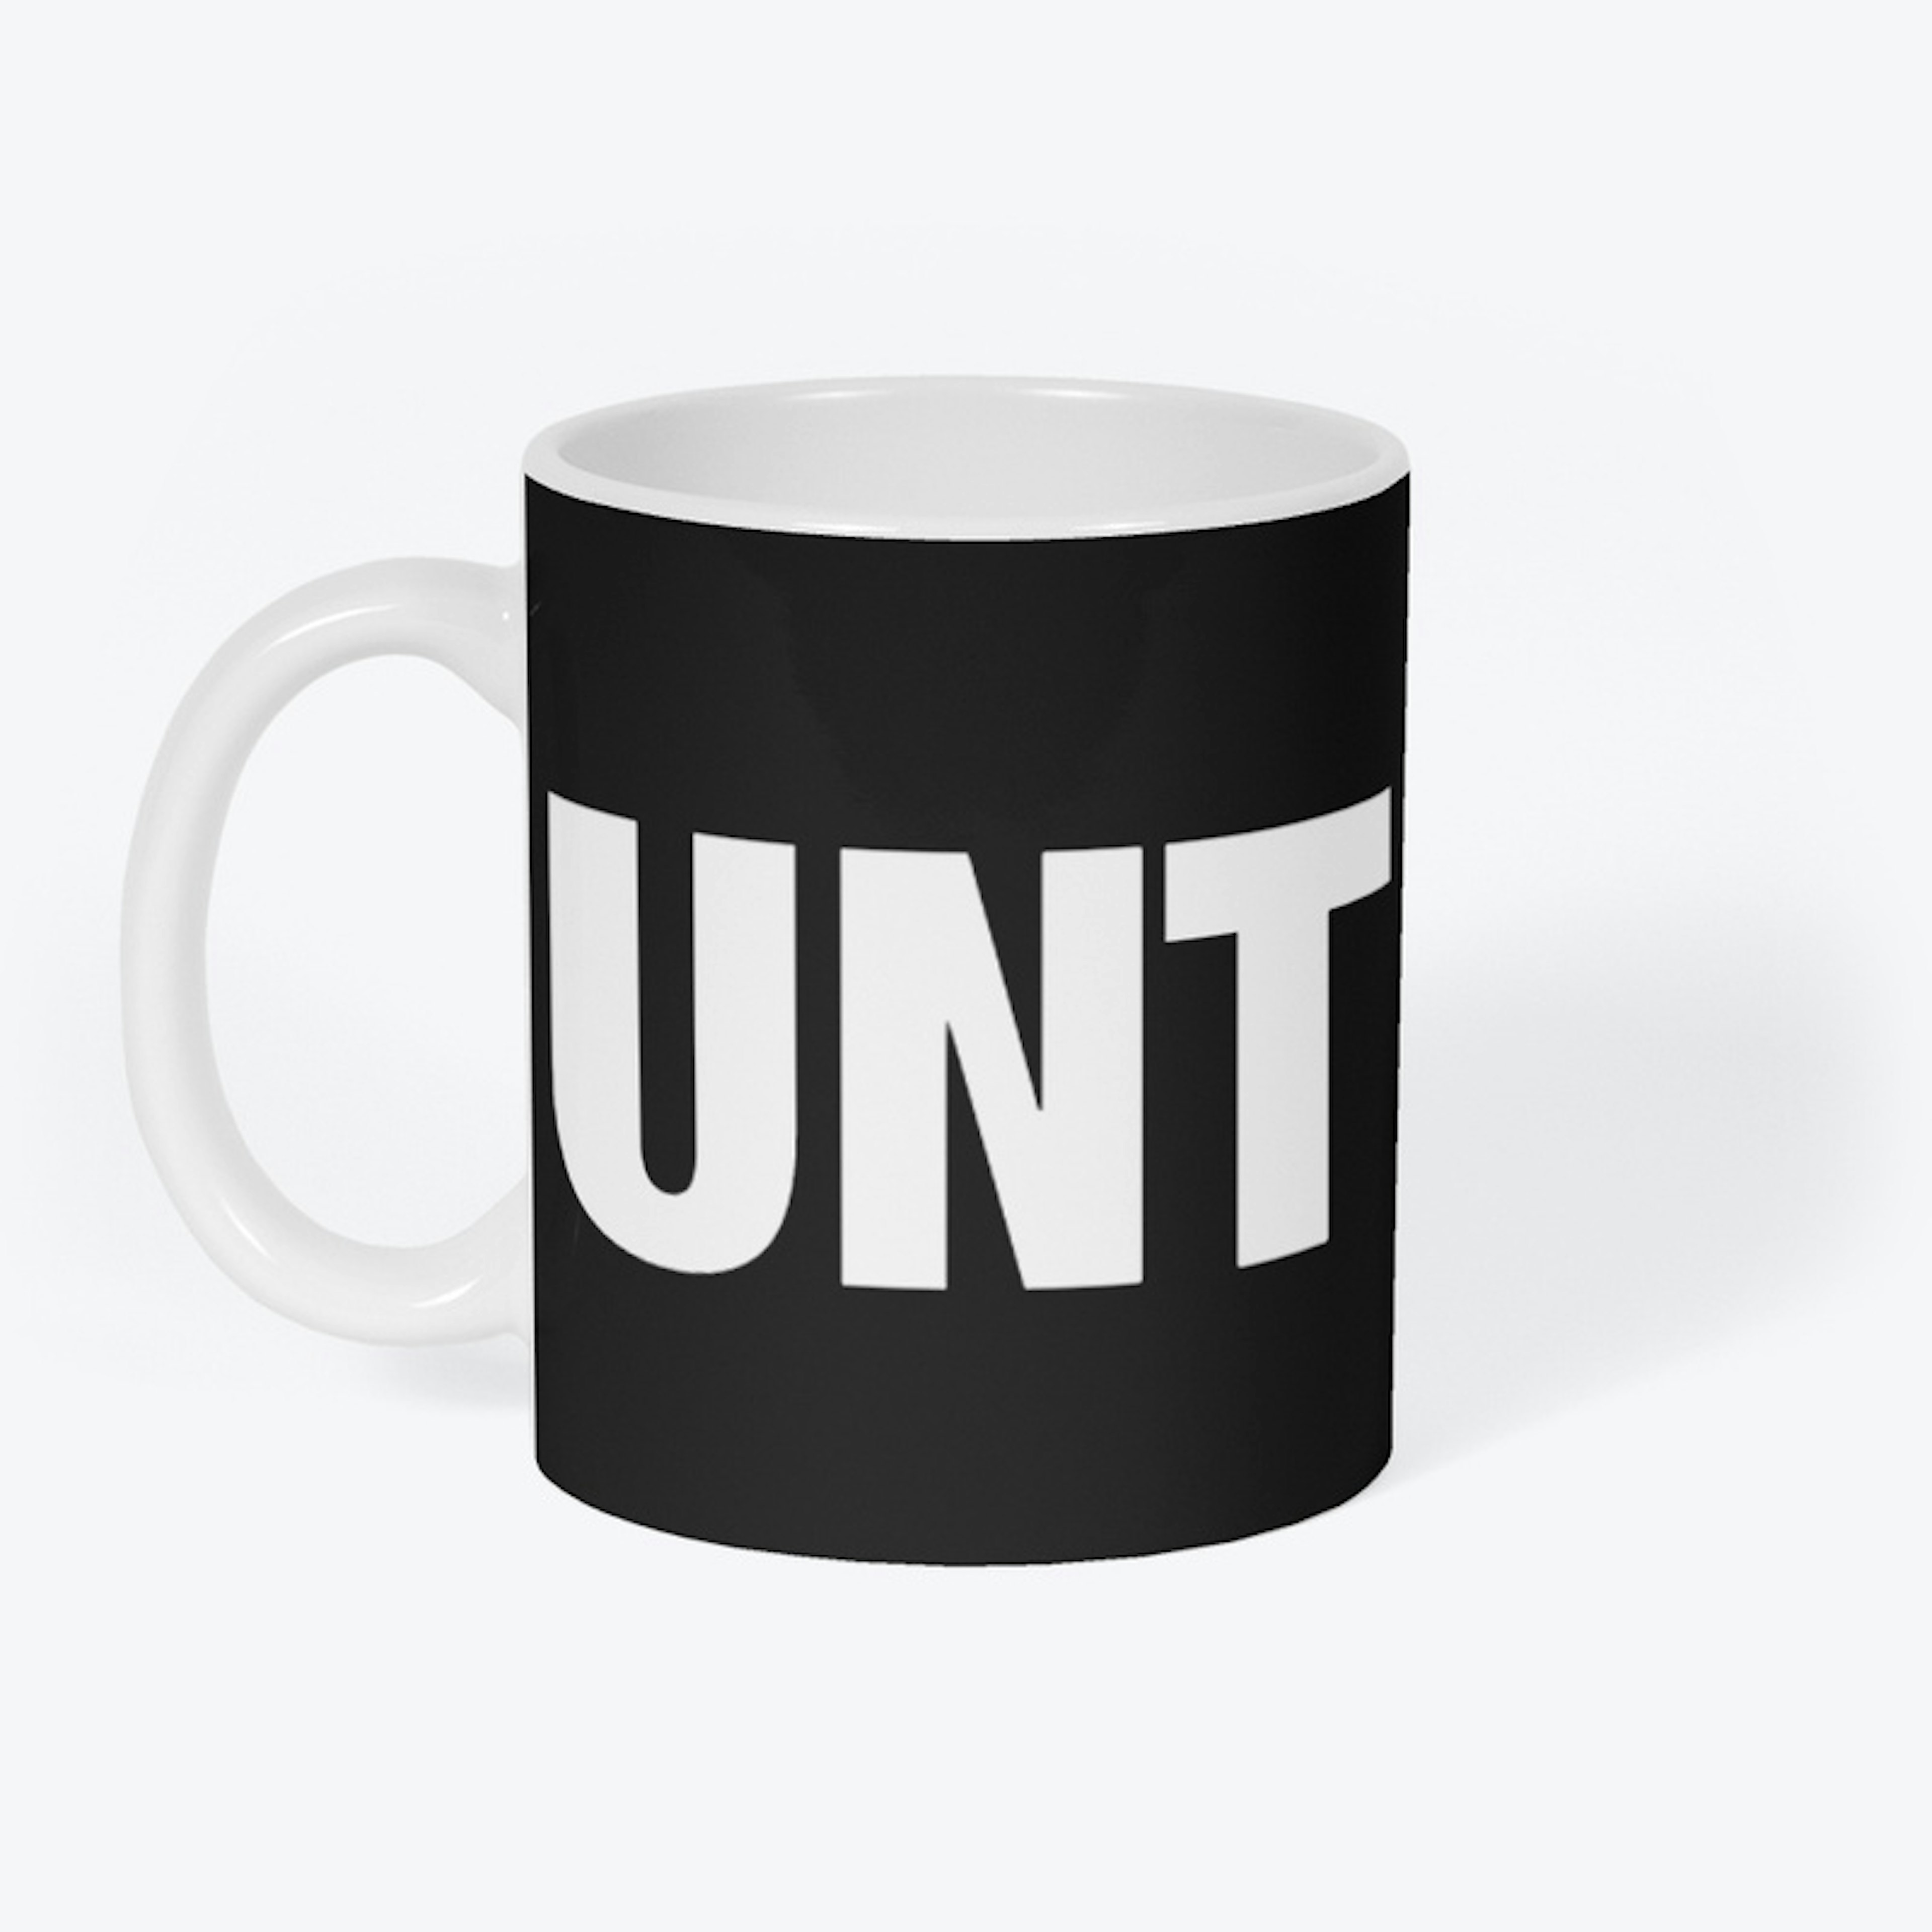 The UNT Special Edition